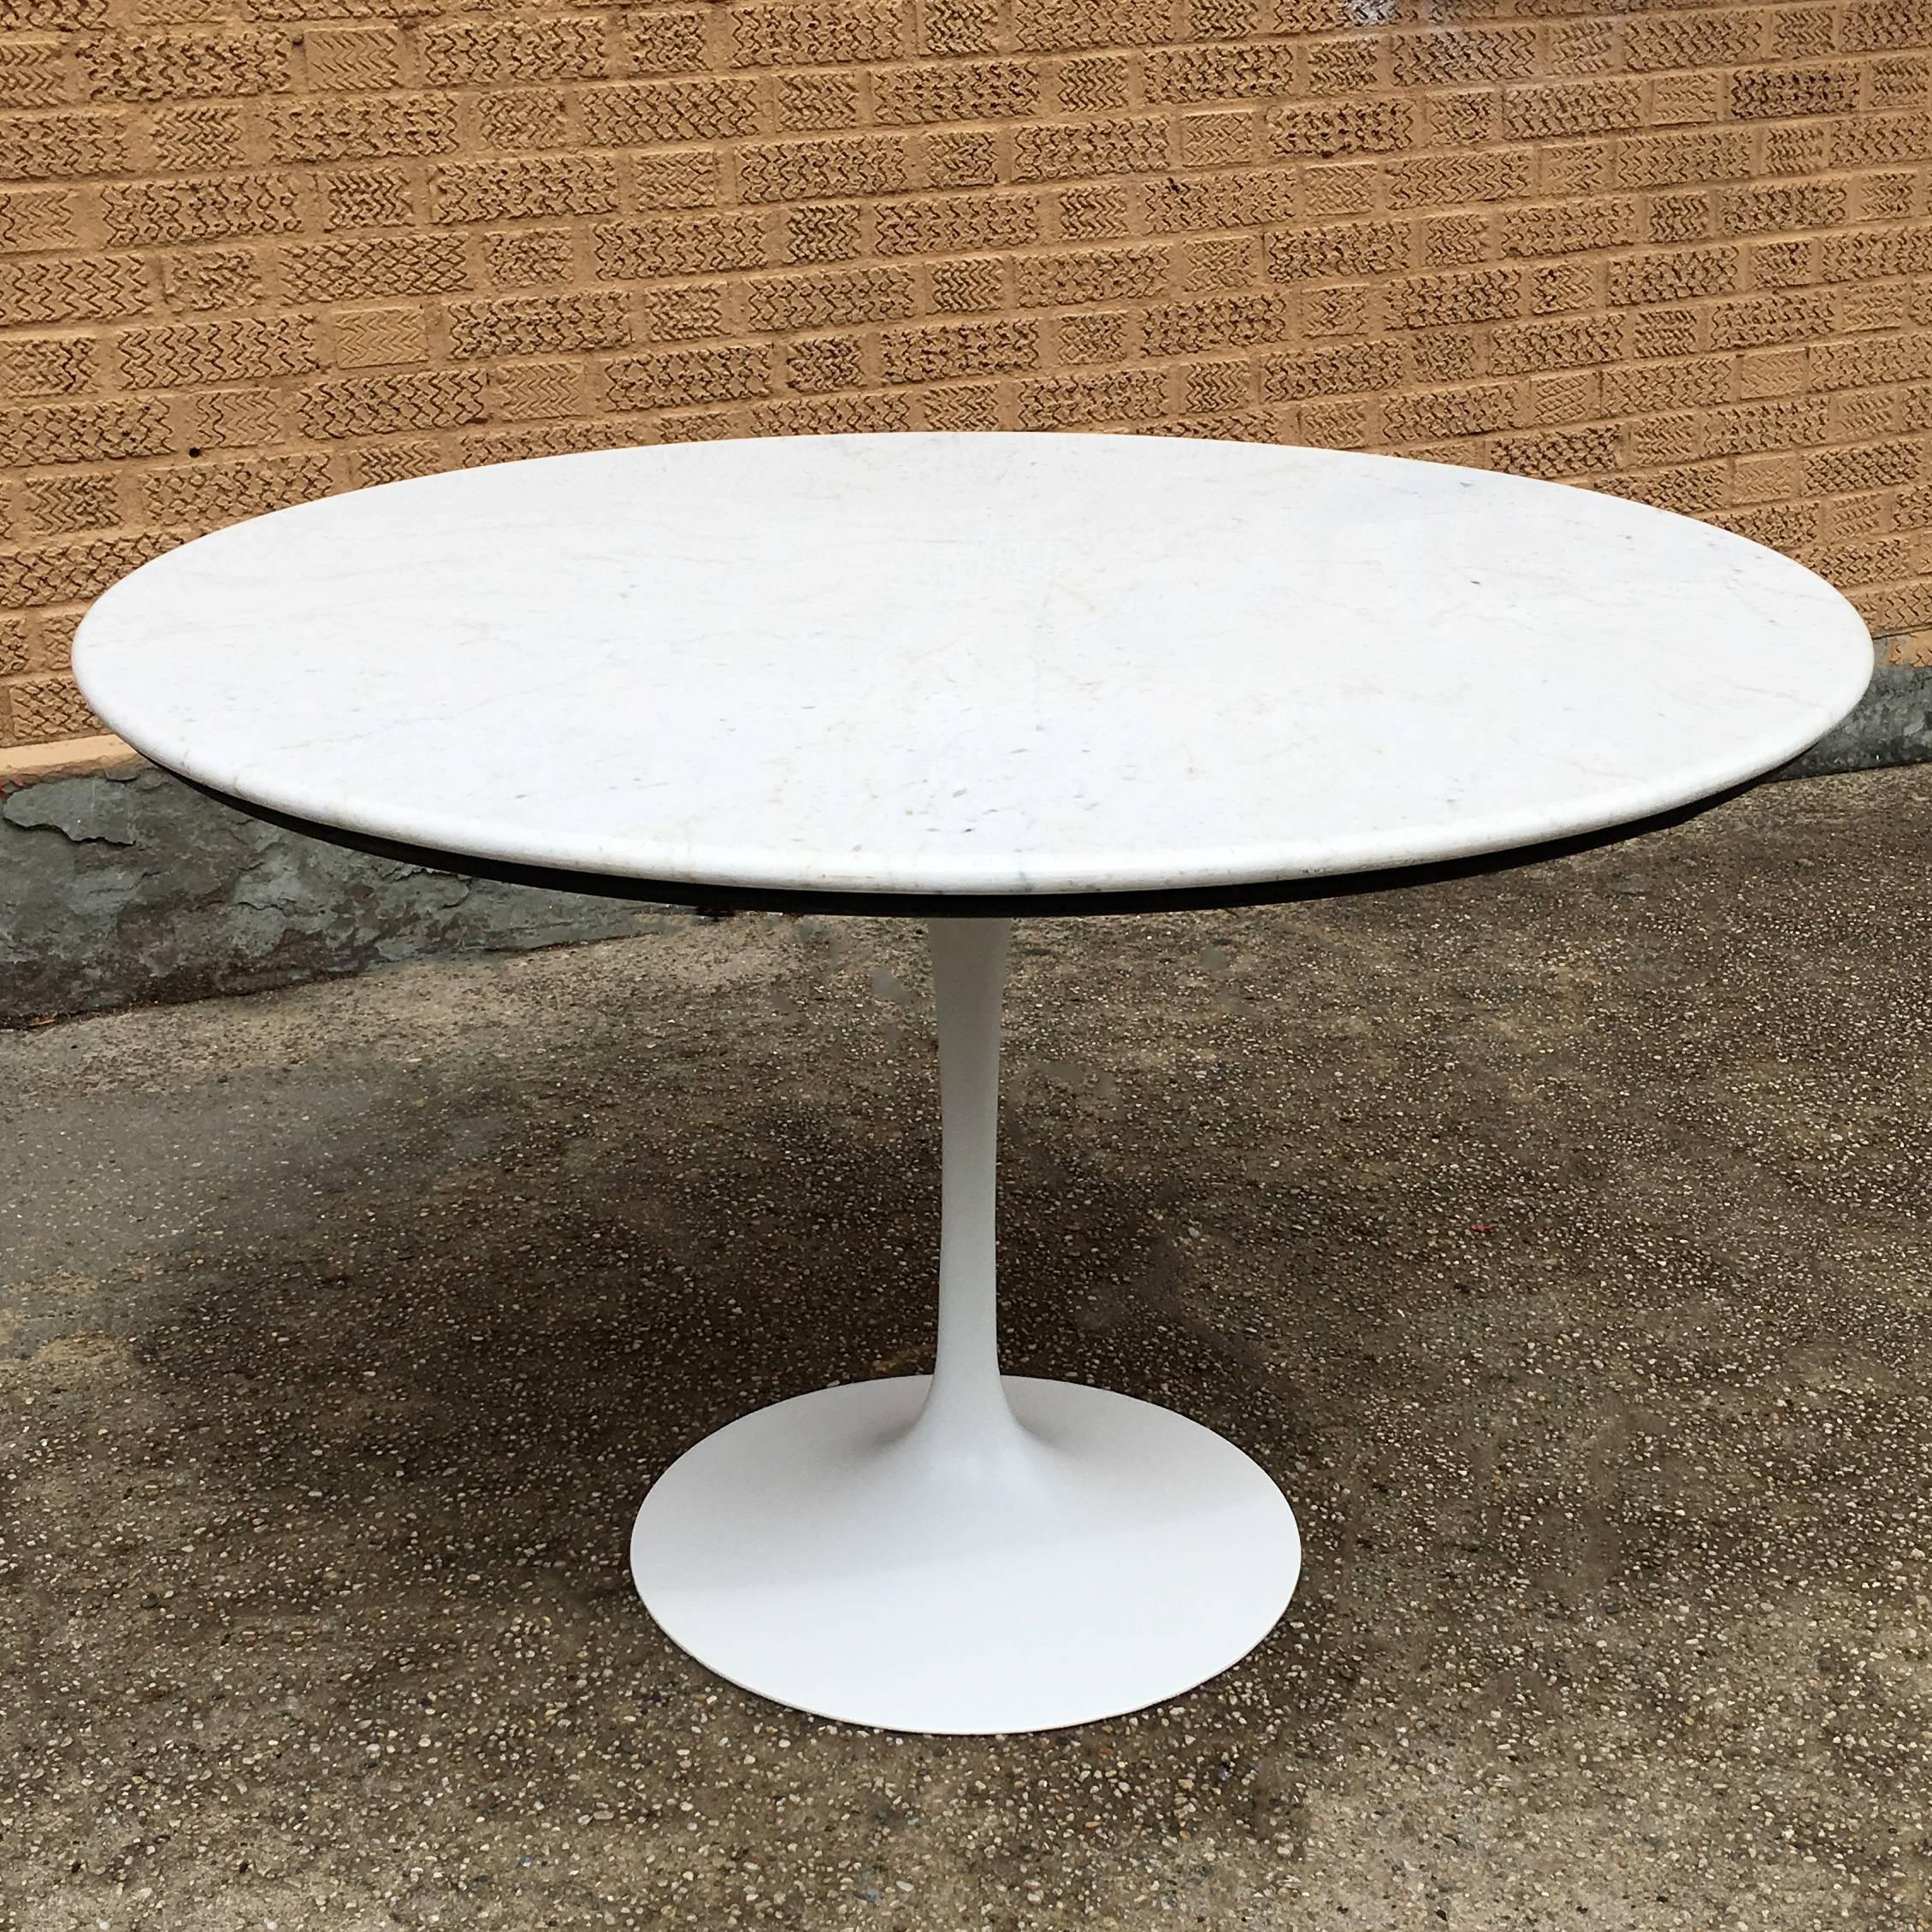 Mid-Century Modern, dining table features a newly painted, Eero Saarinen, white tulip pedestal base and a 45